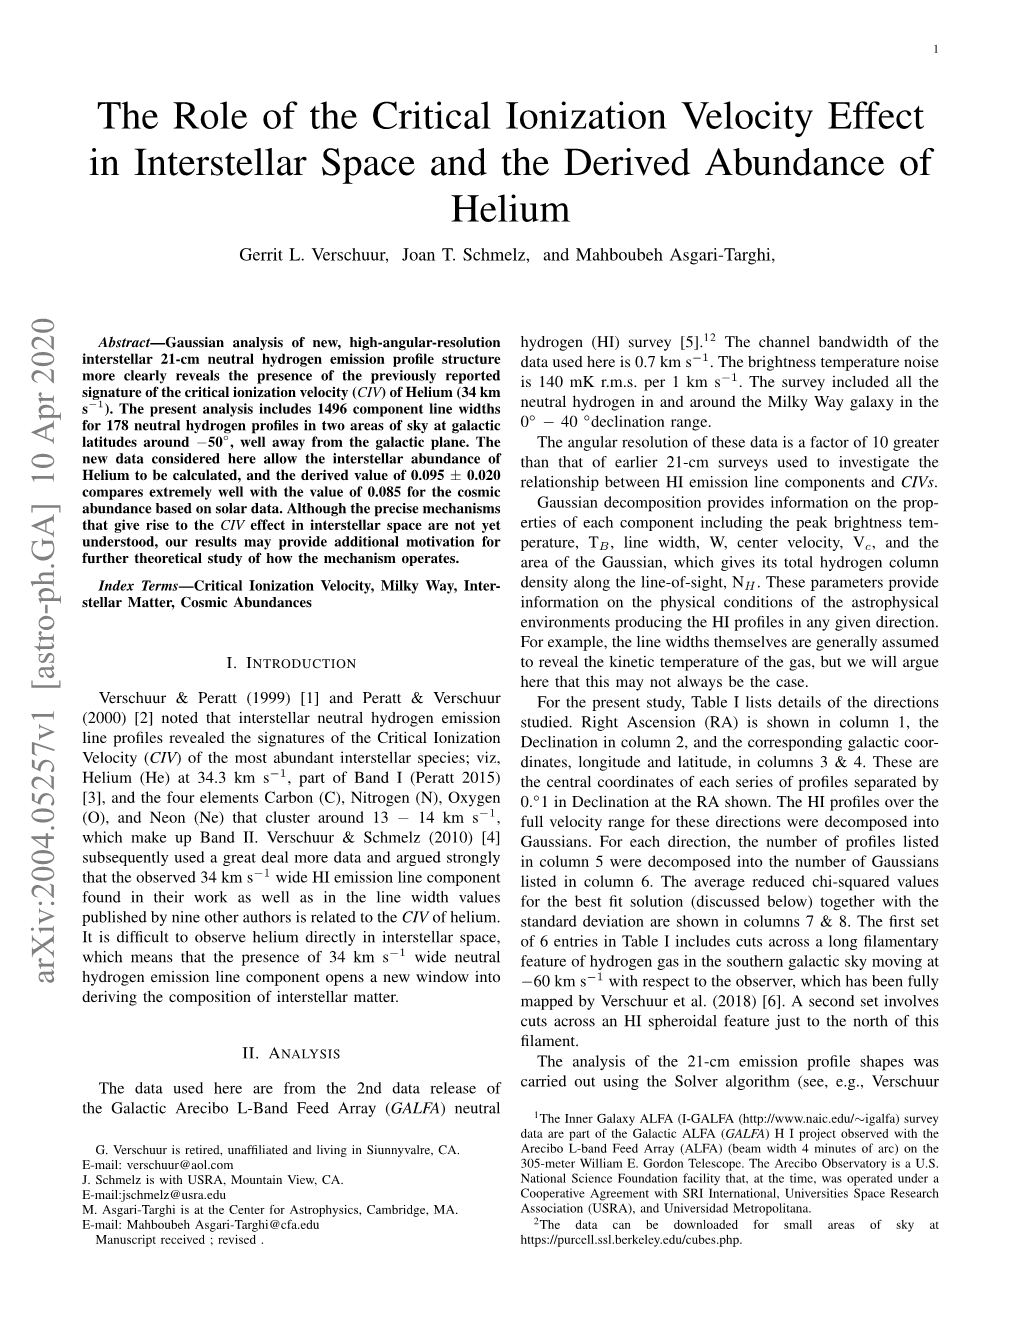 The Role of the Critical Ionization Velocity Effect in Interstellar Space and the Derived Abundance of Helium Gerrit L